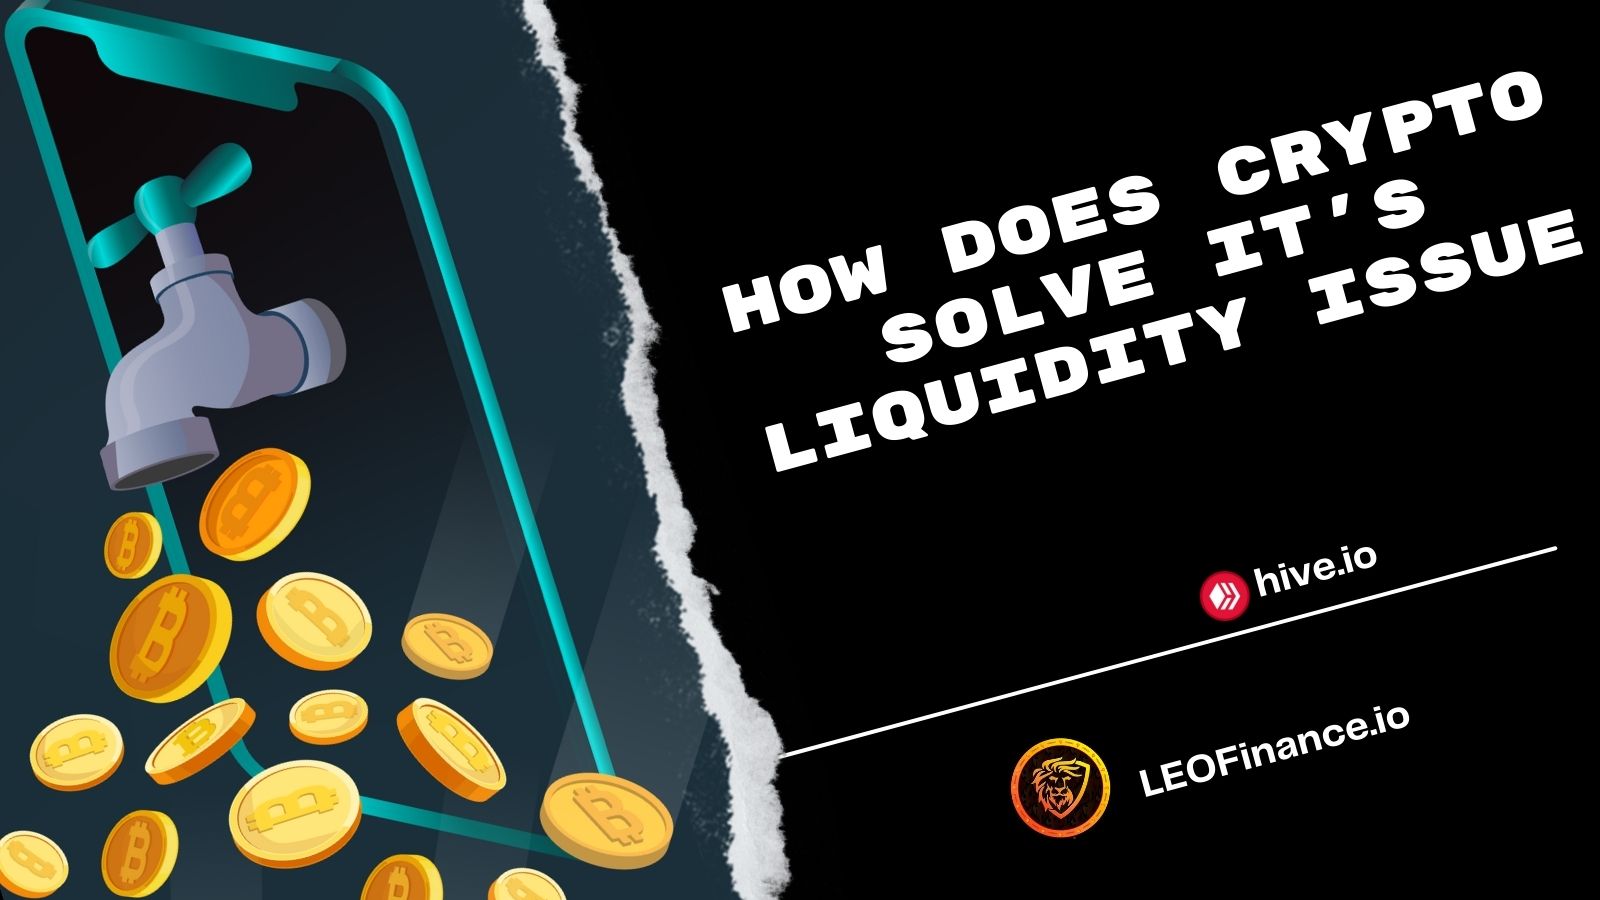 @bitcoinflood/how-does-crypto-solve-it-s-liquidity-issue